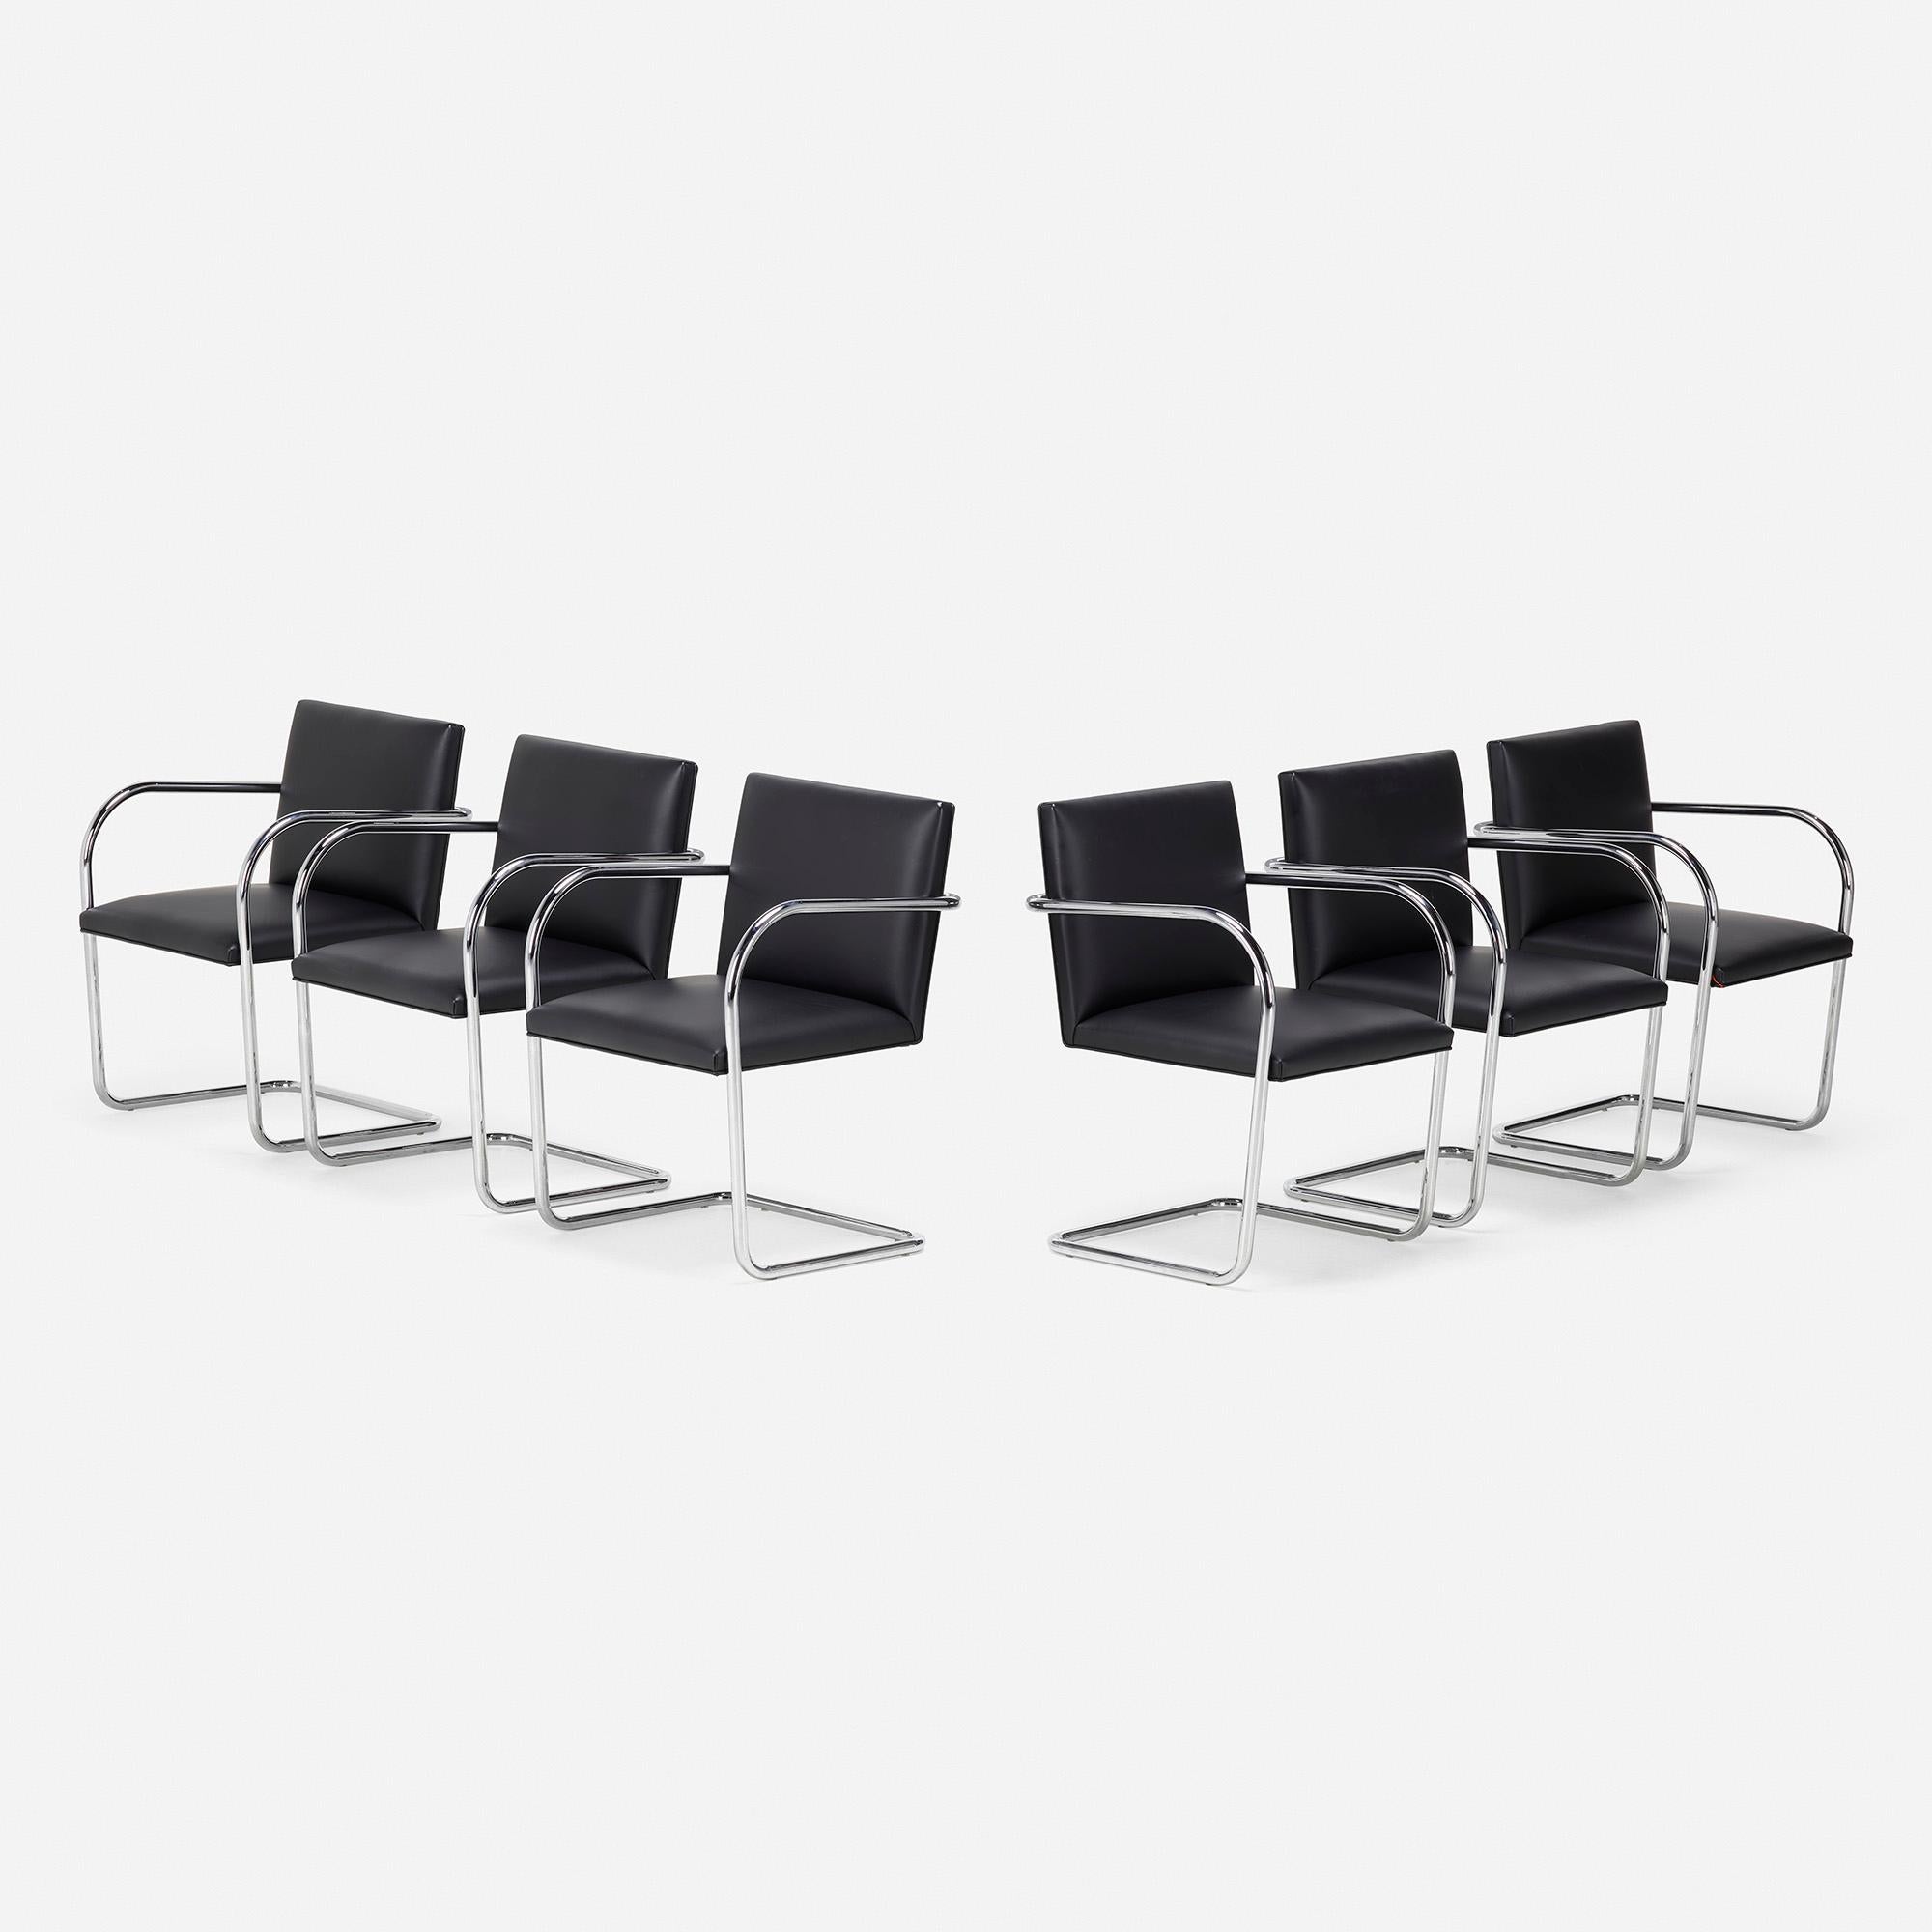 Made by: Knoll Studio, Germany, 1929 / c. 1990

Material: chrome-plated steel, leather

Size: 22.75 W × 22.5 D × 31.5 H in

Fabric manufacturer's label to underside of each example ‘Distributed by Knoll Inc.’.